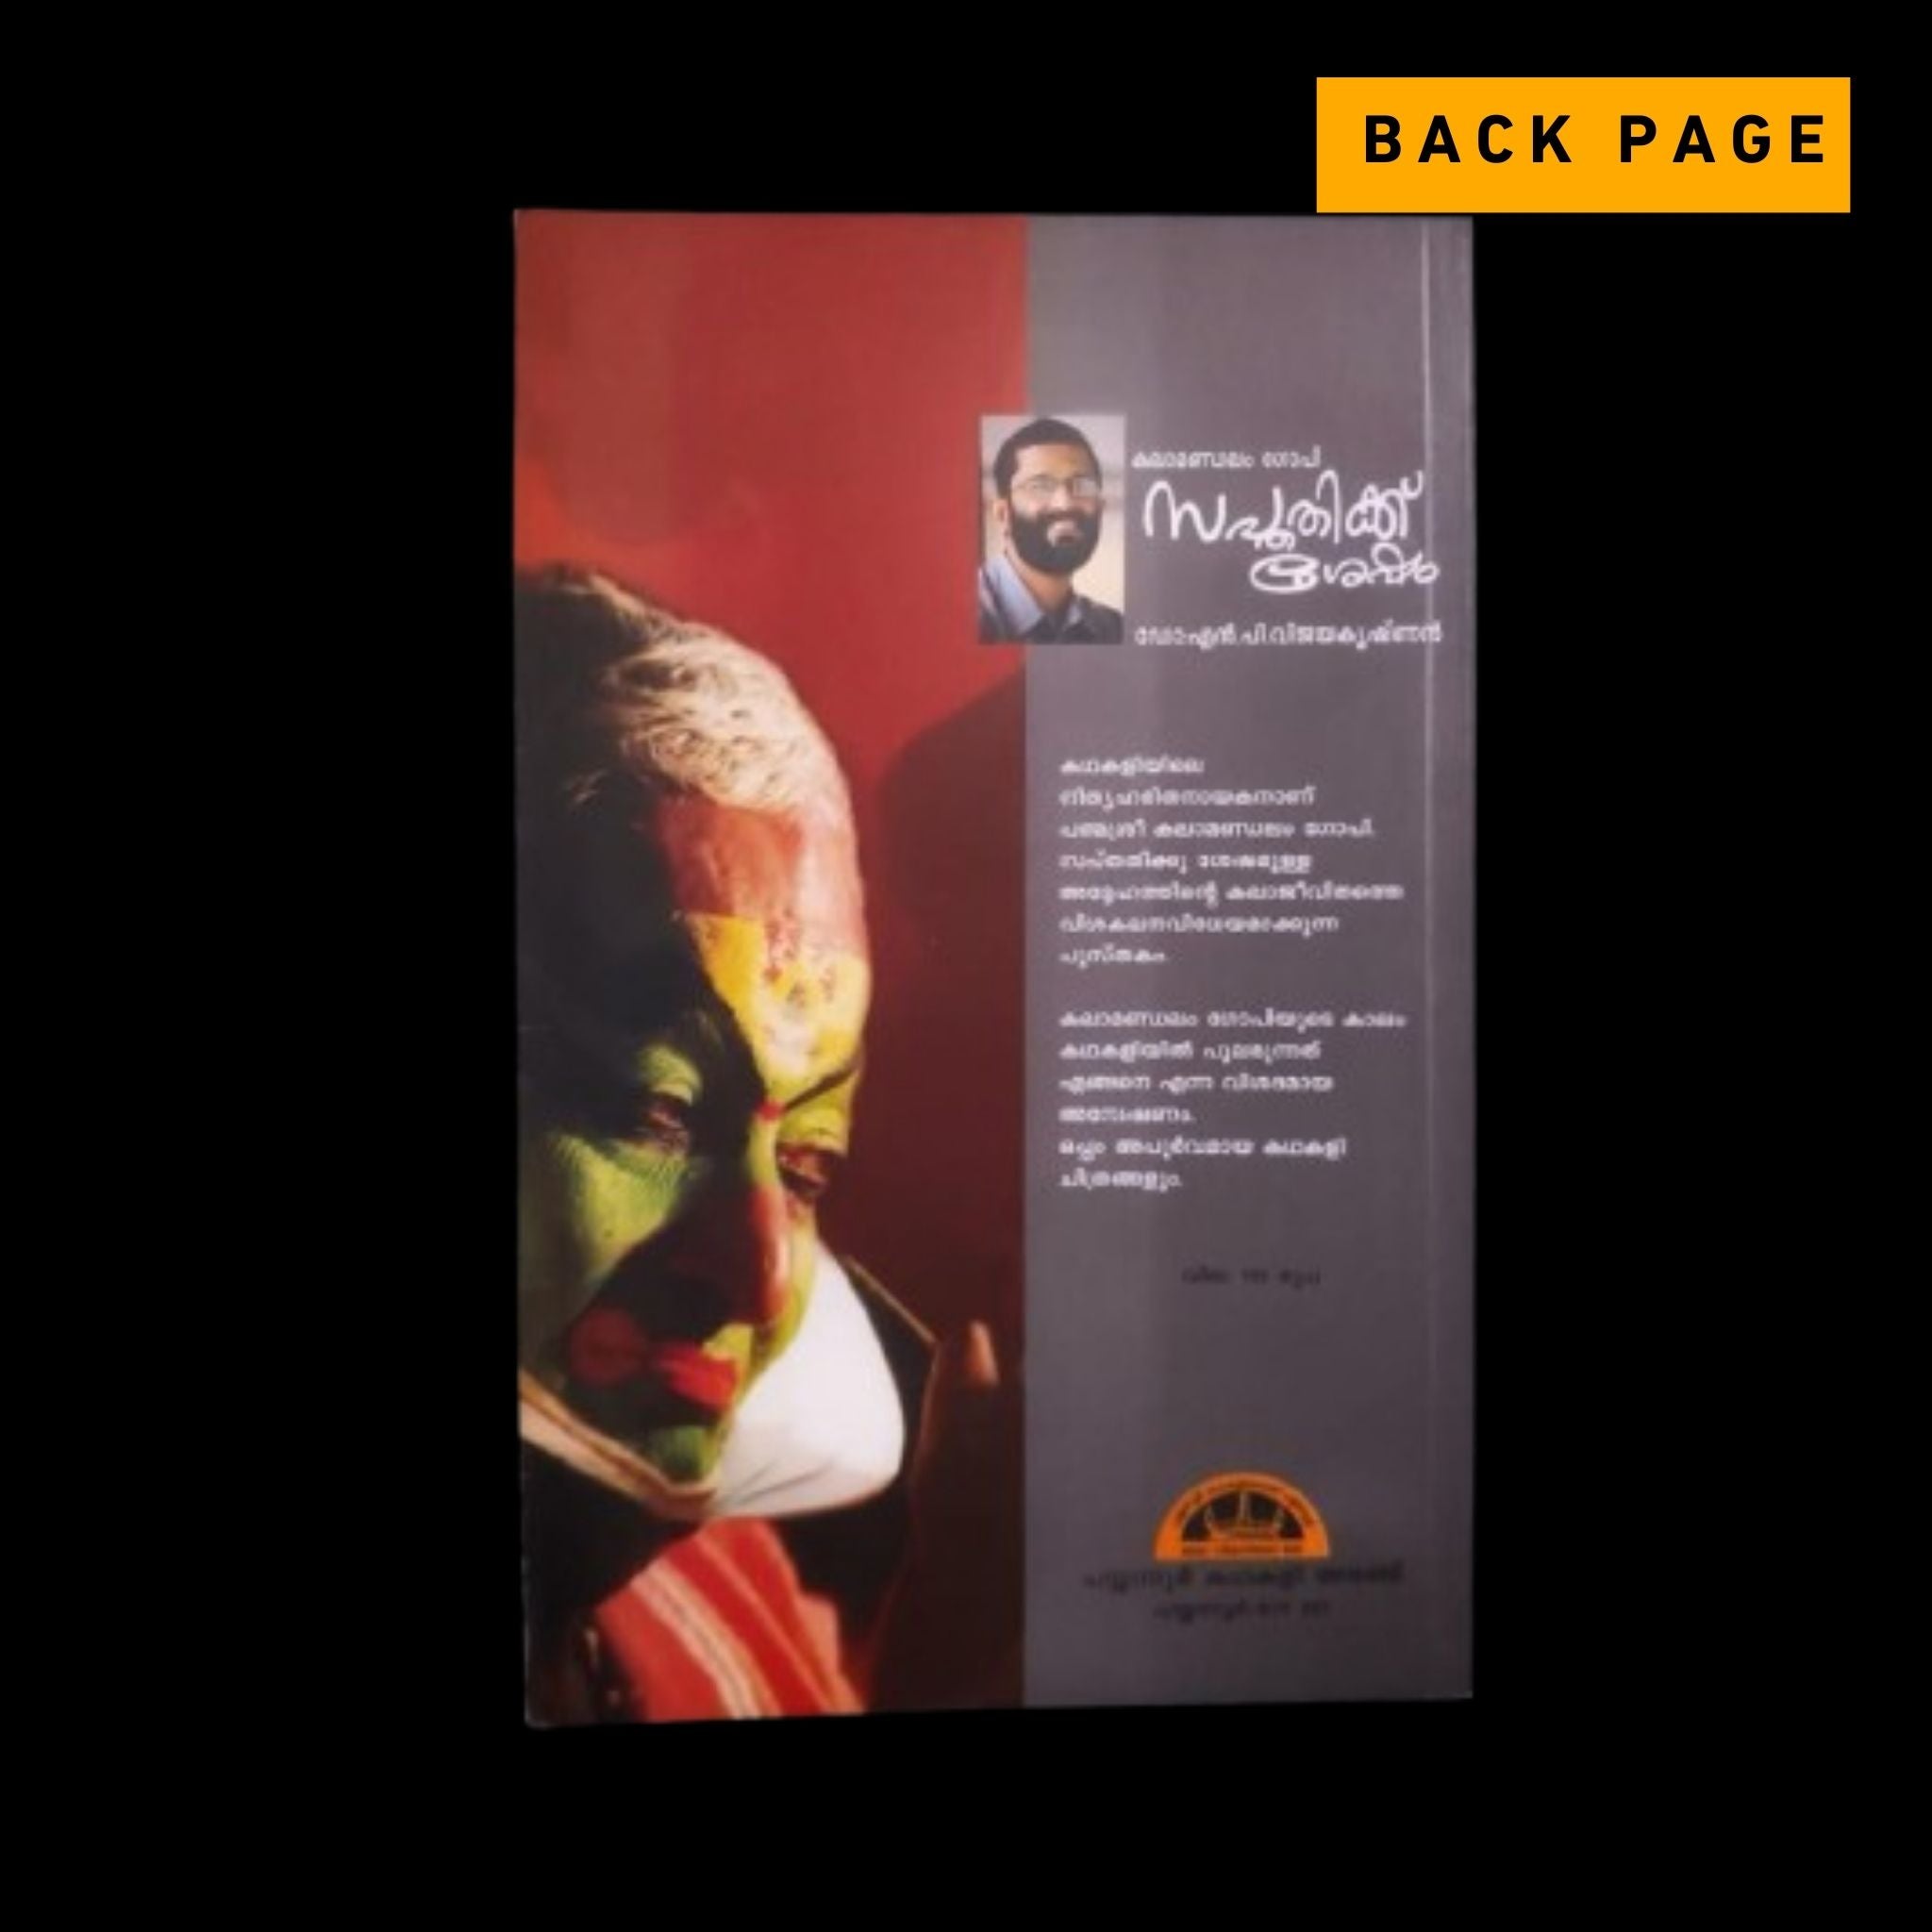 a book with a man's face painted on it